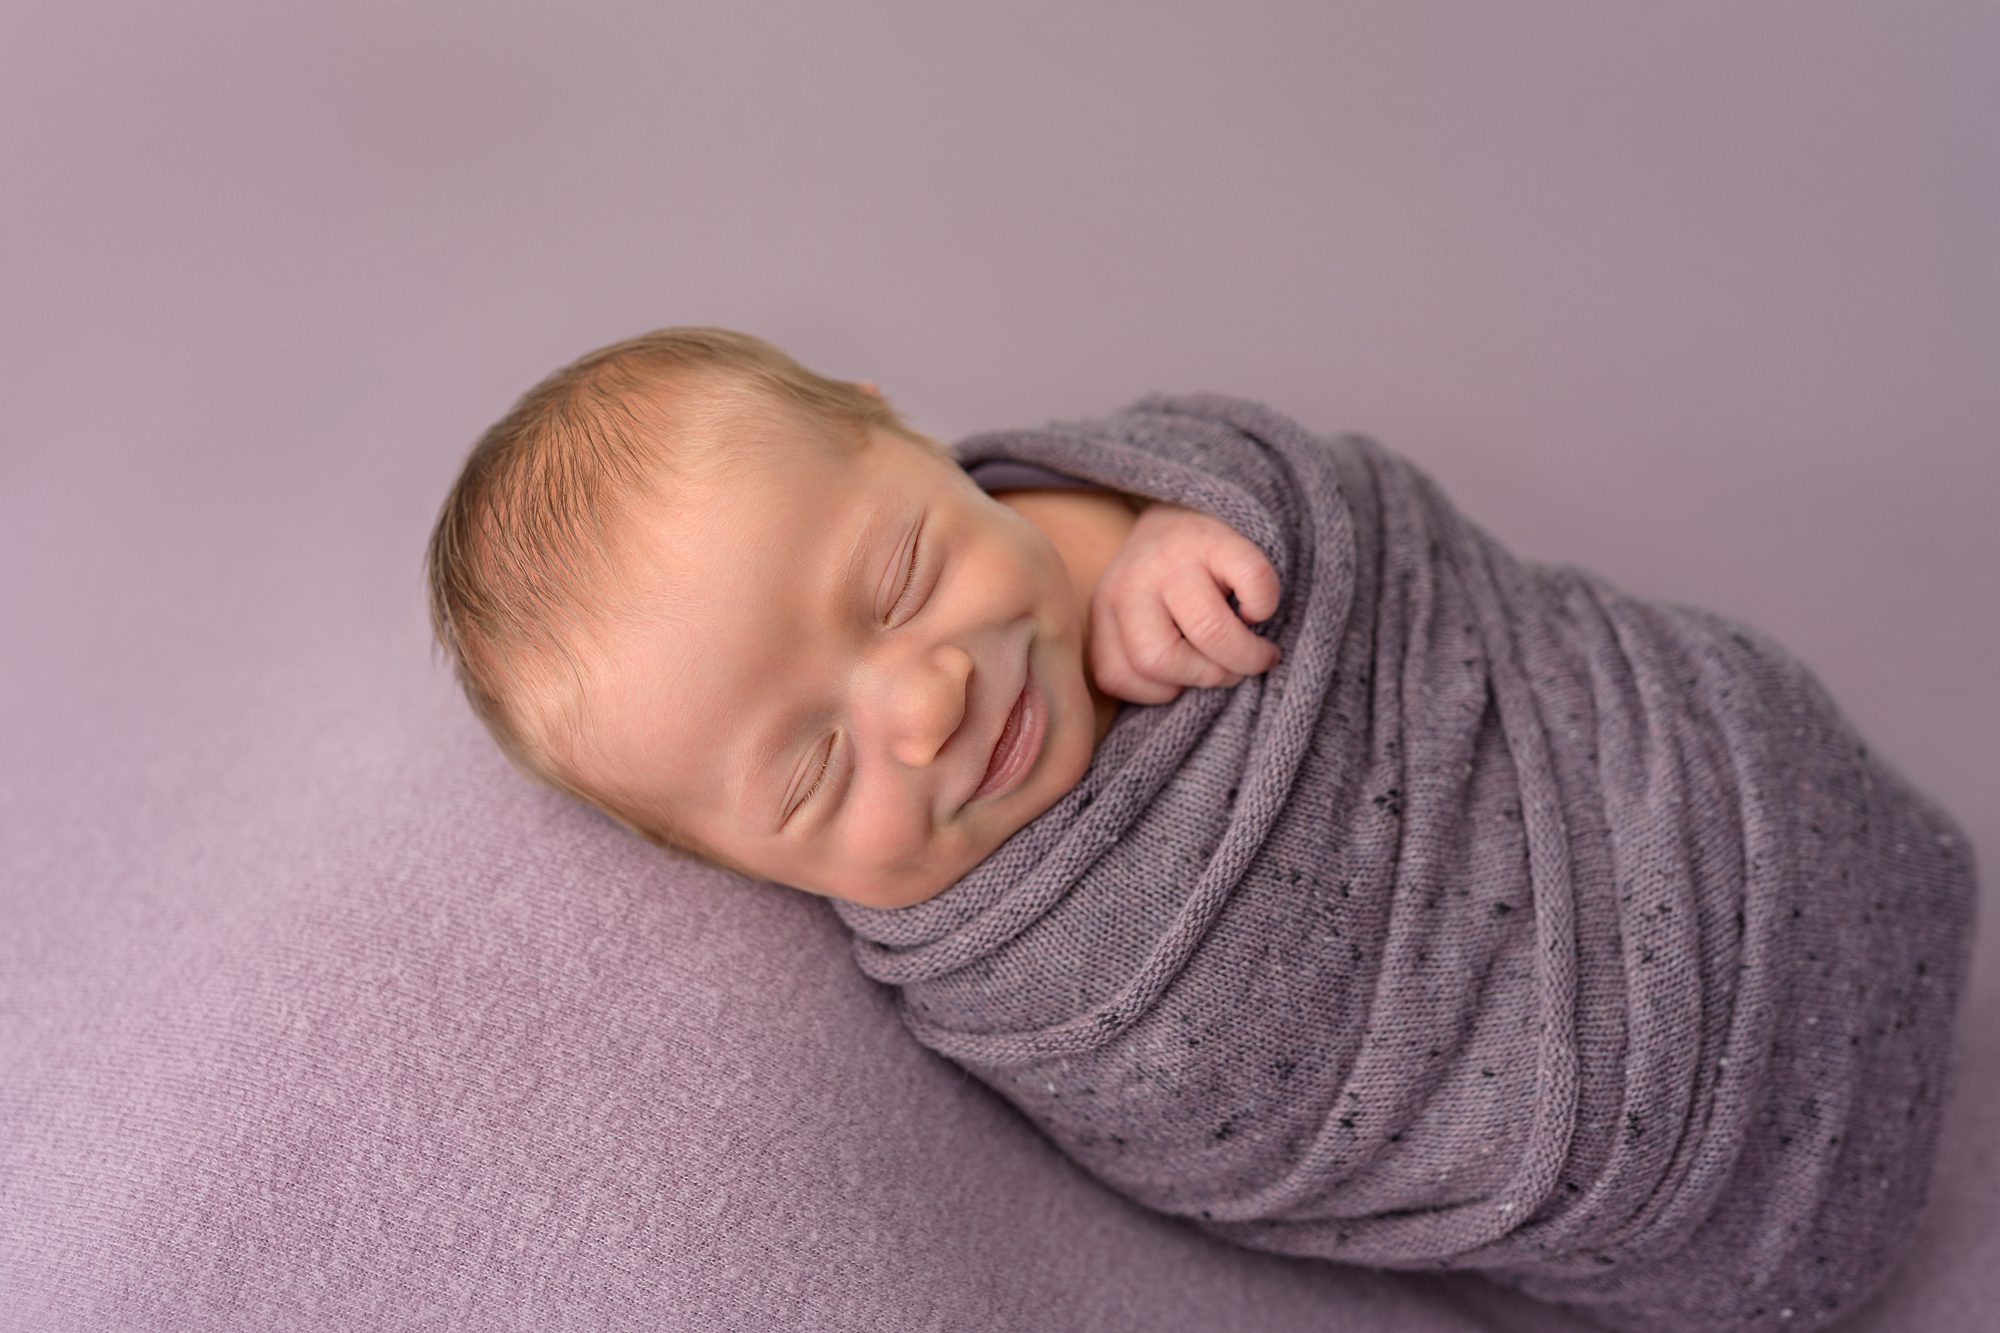 Smiling newborn girl on shades of purple, photographed at the Faces You Love Overland Park portrait studio.